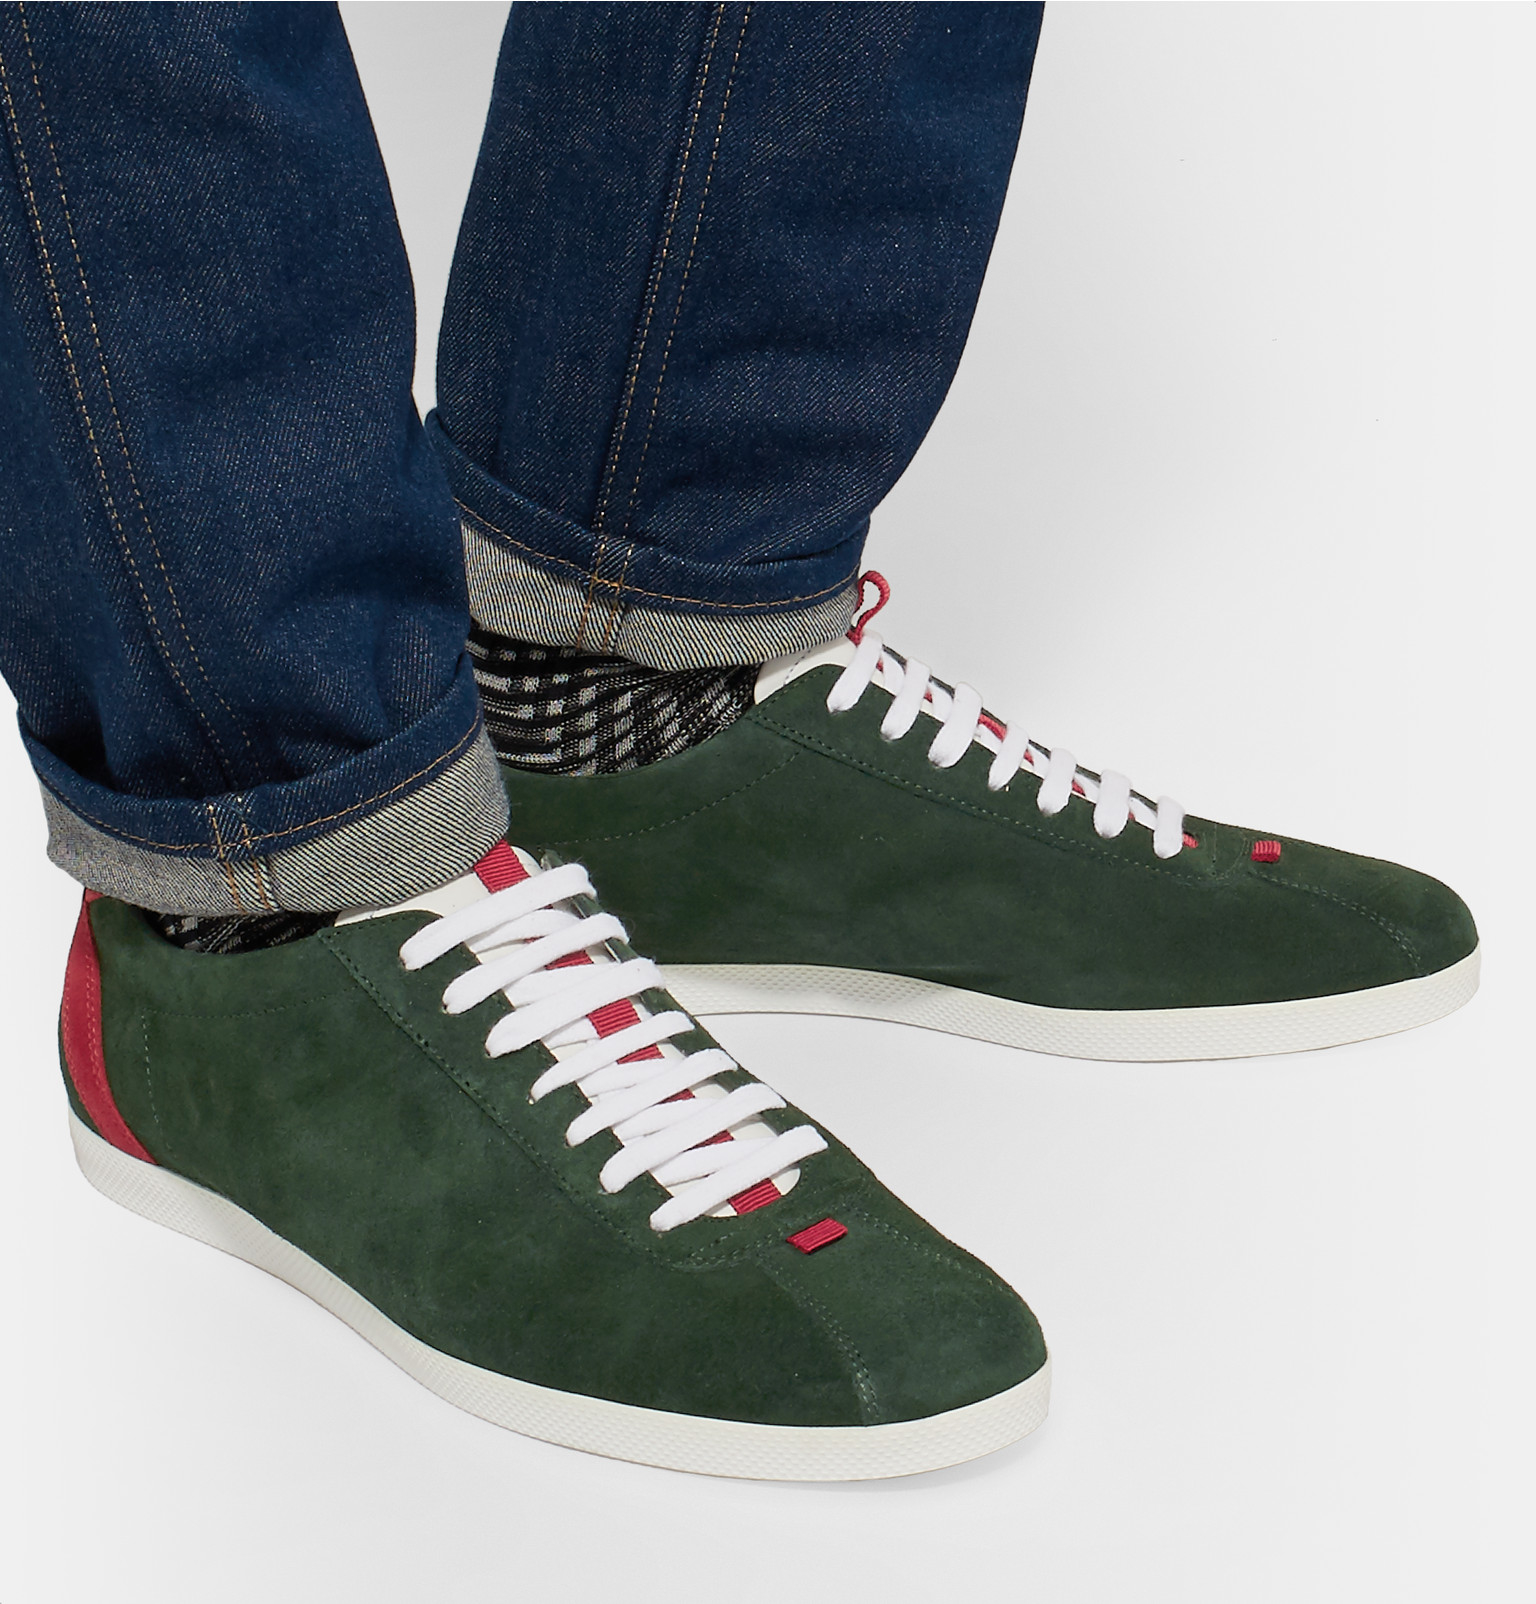 Gucci Suede Tennis Sneakers in Green for Men Lyst